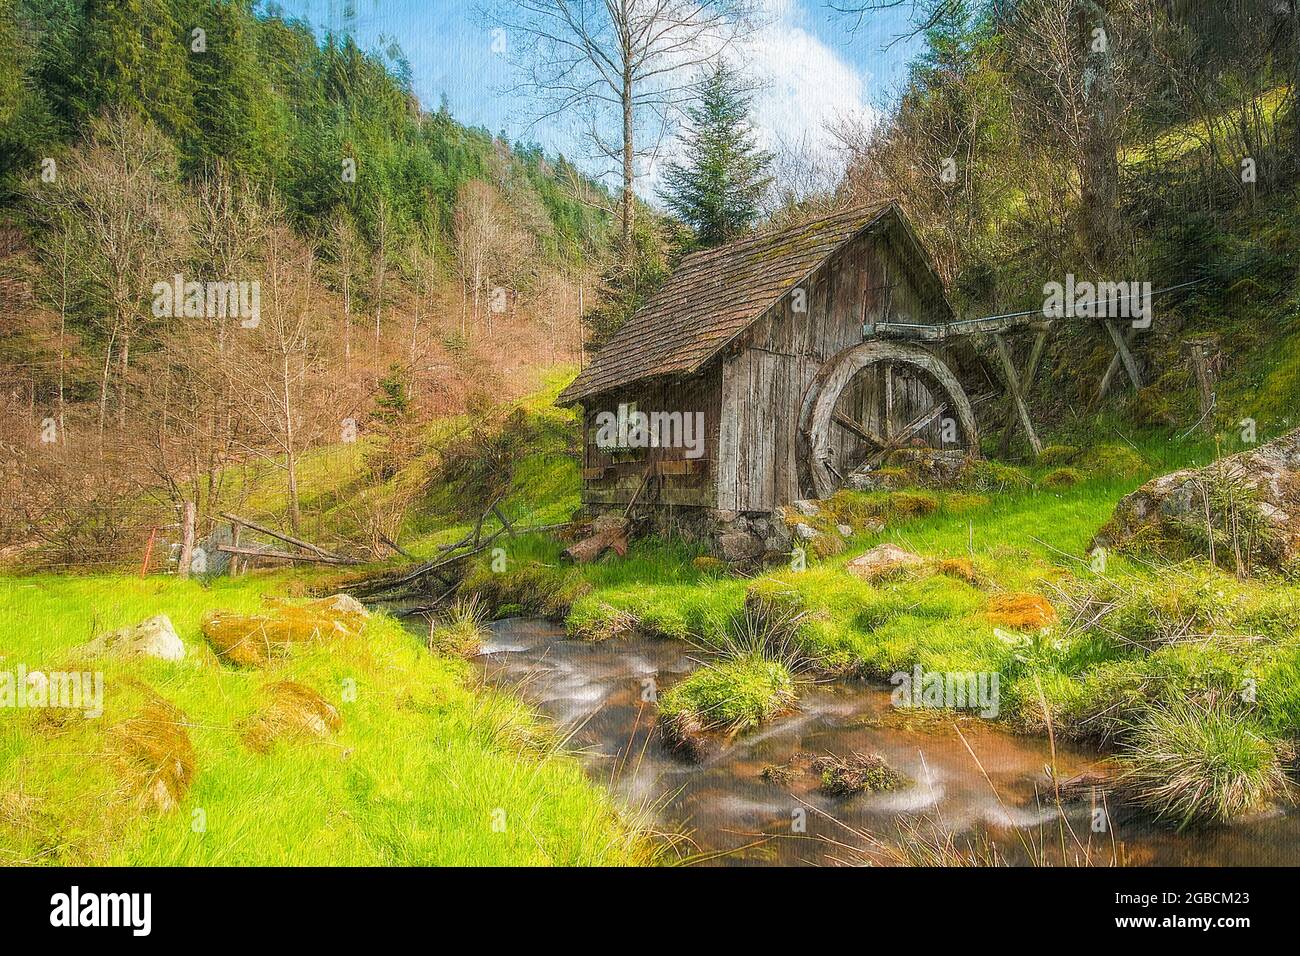 An old watermill besides a stream in the black forest Germany, given a painted and textured appearance. Stock Photo